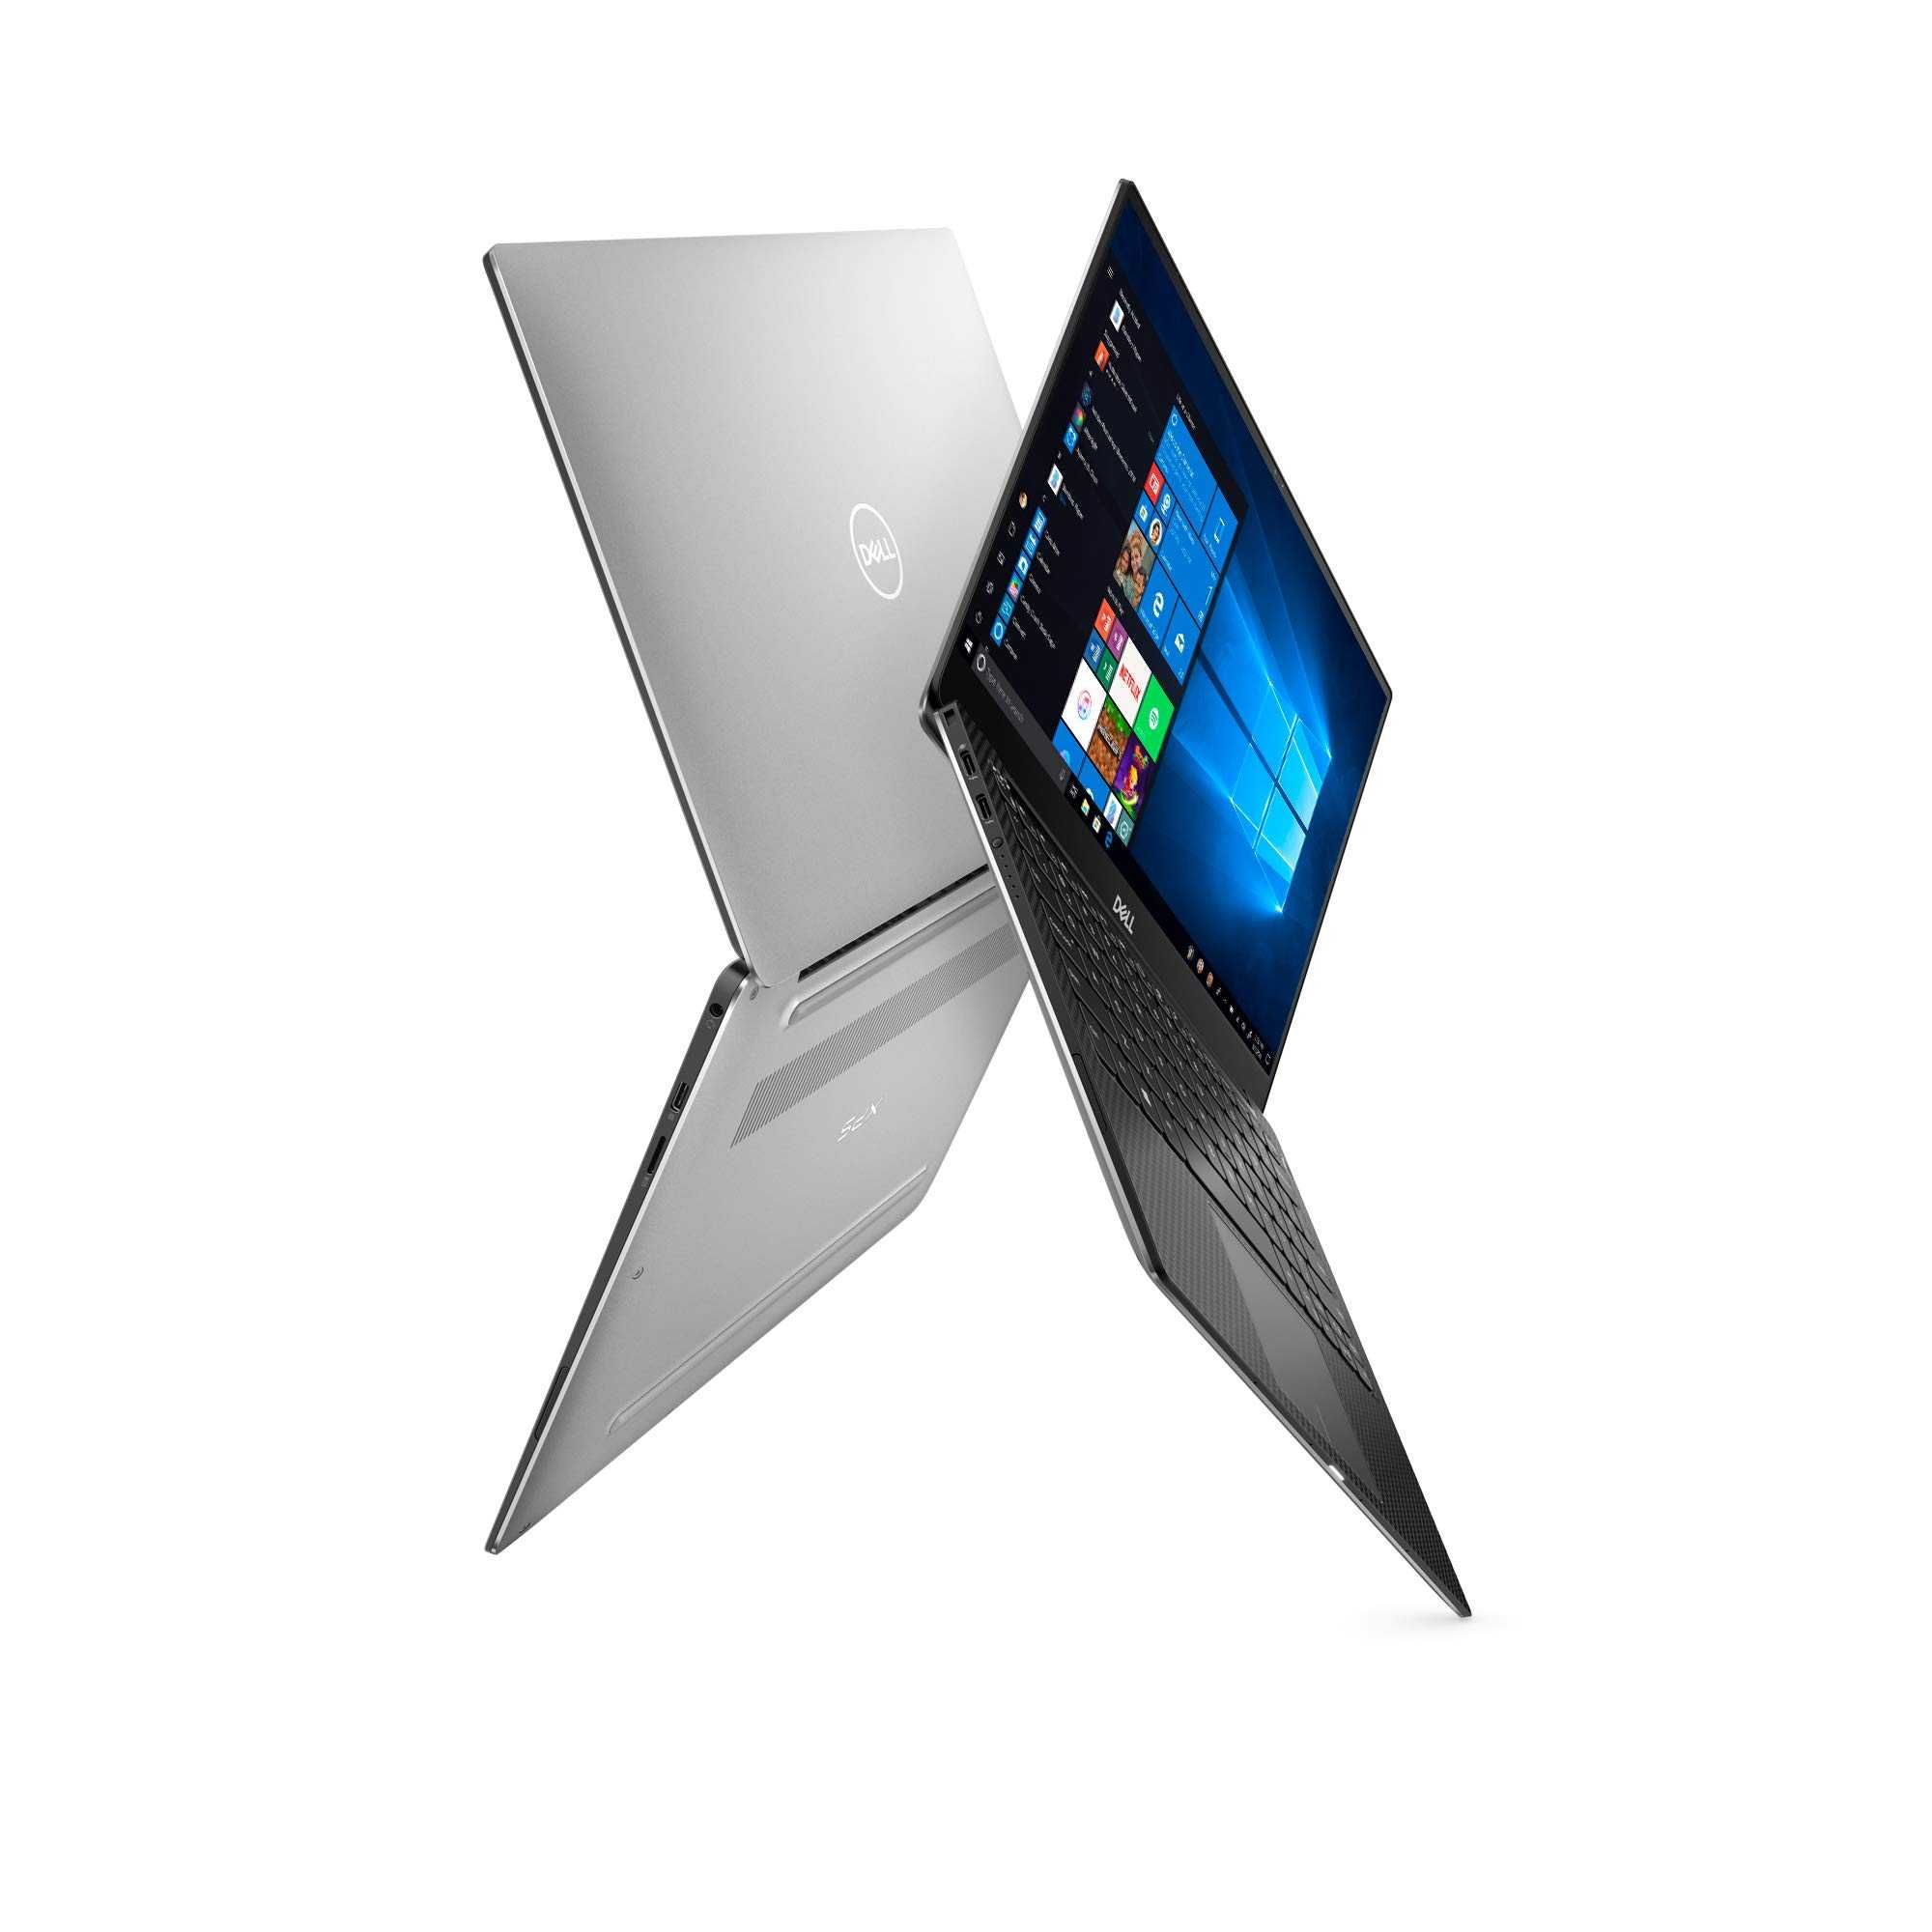 новый Dell 7390 XPS 13 13.3" FHD Touch/ i7 / 16GB / 512GB SSD Silver